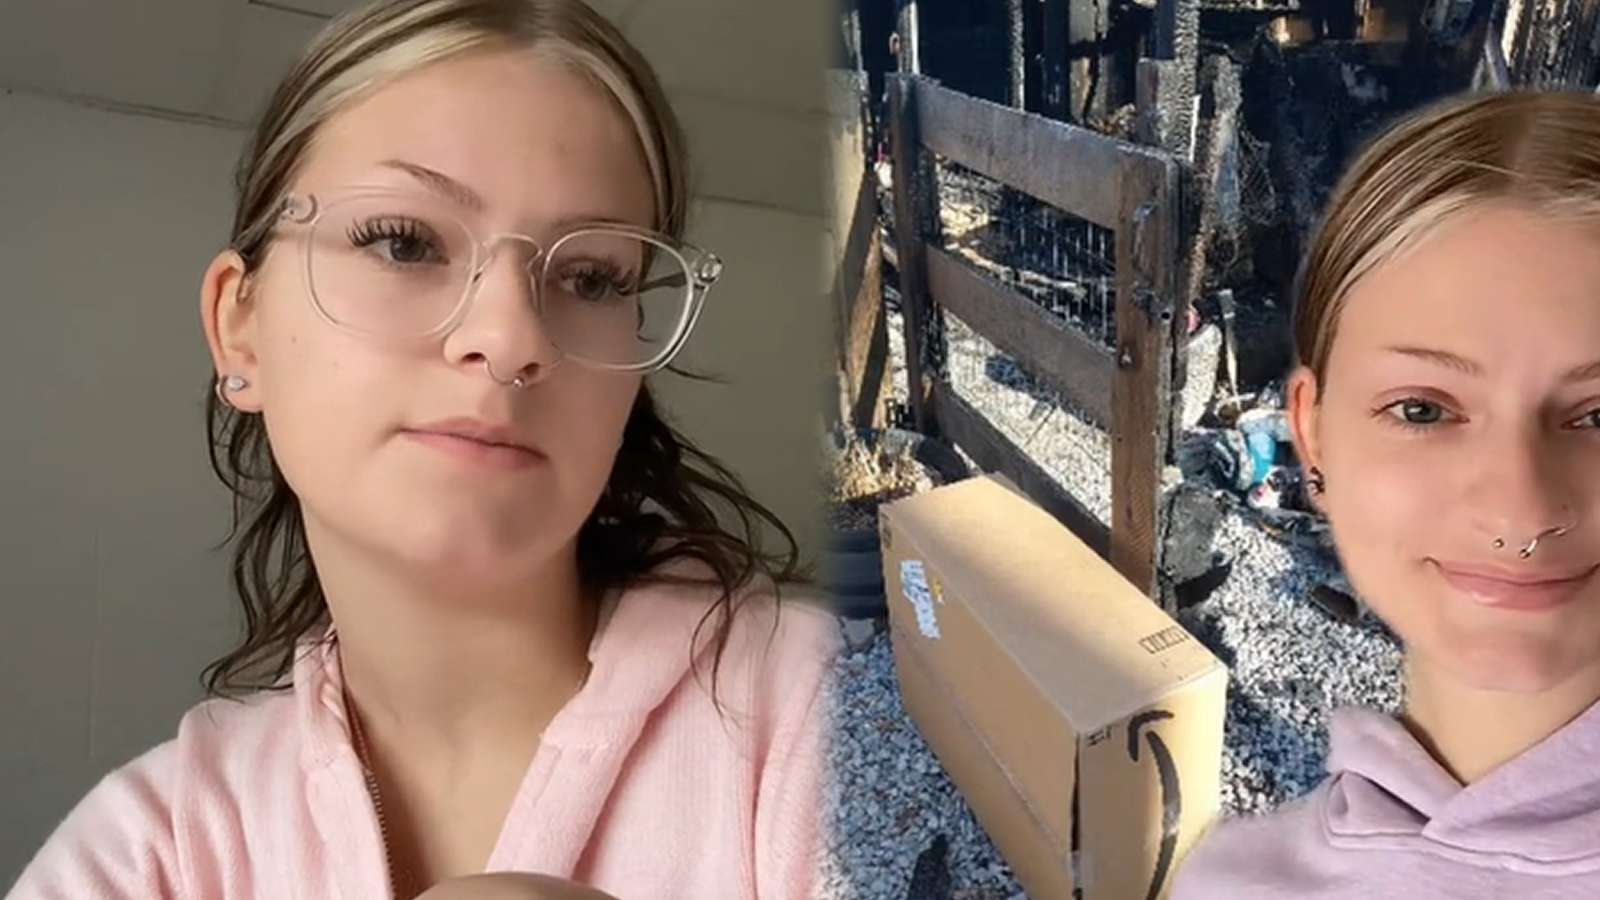 Customer left baffled after Amazon delivers package to her burnt down house